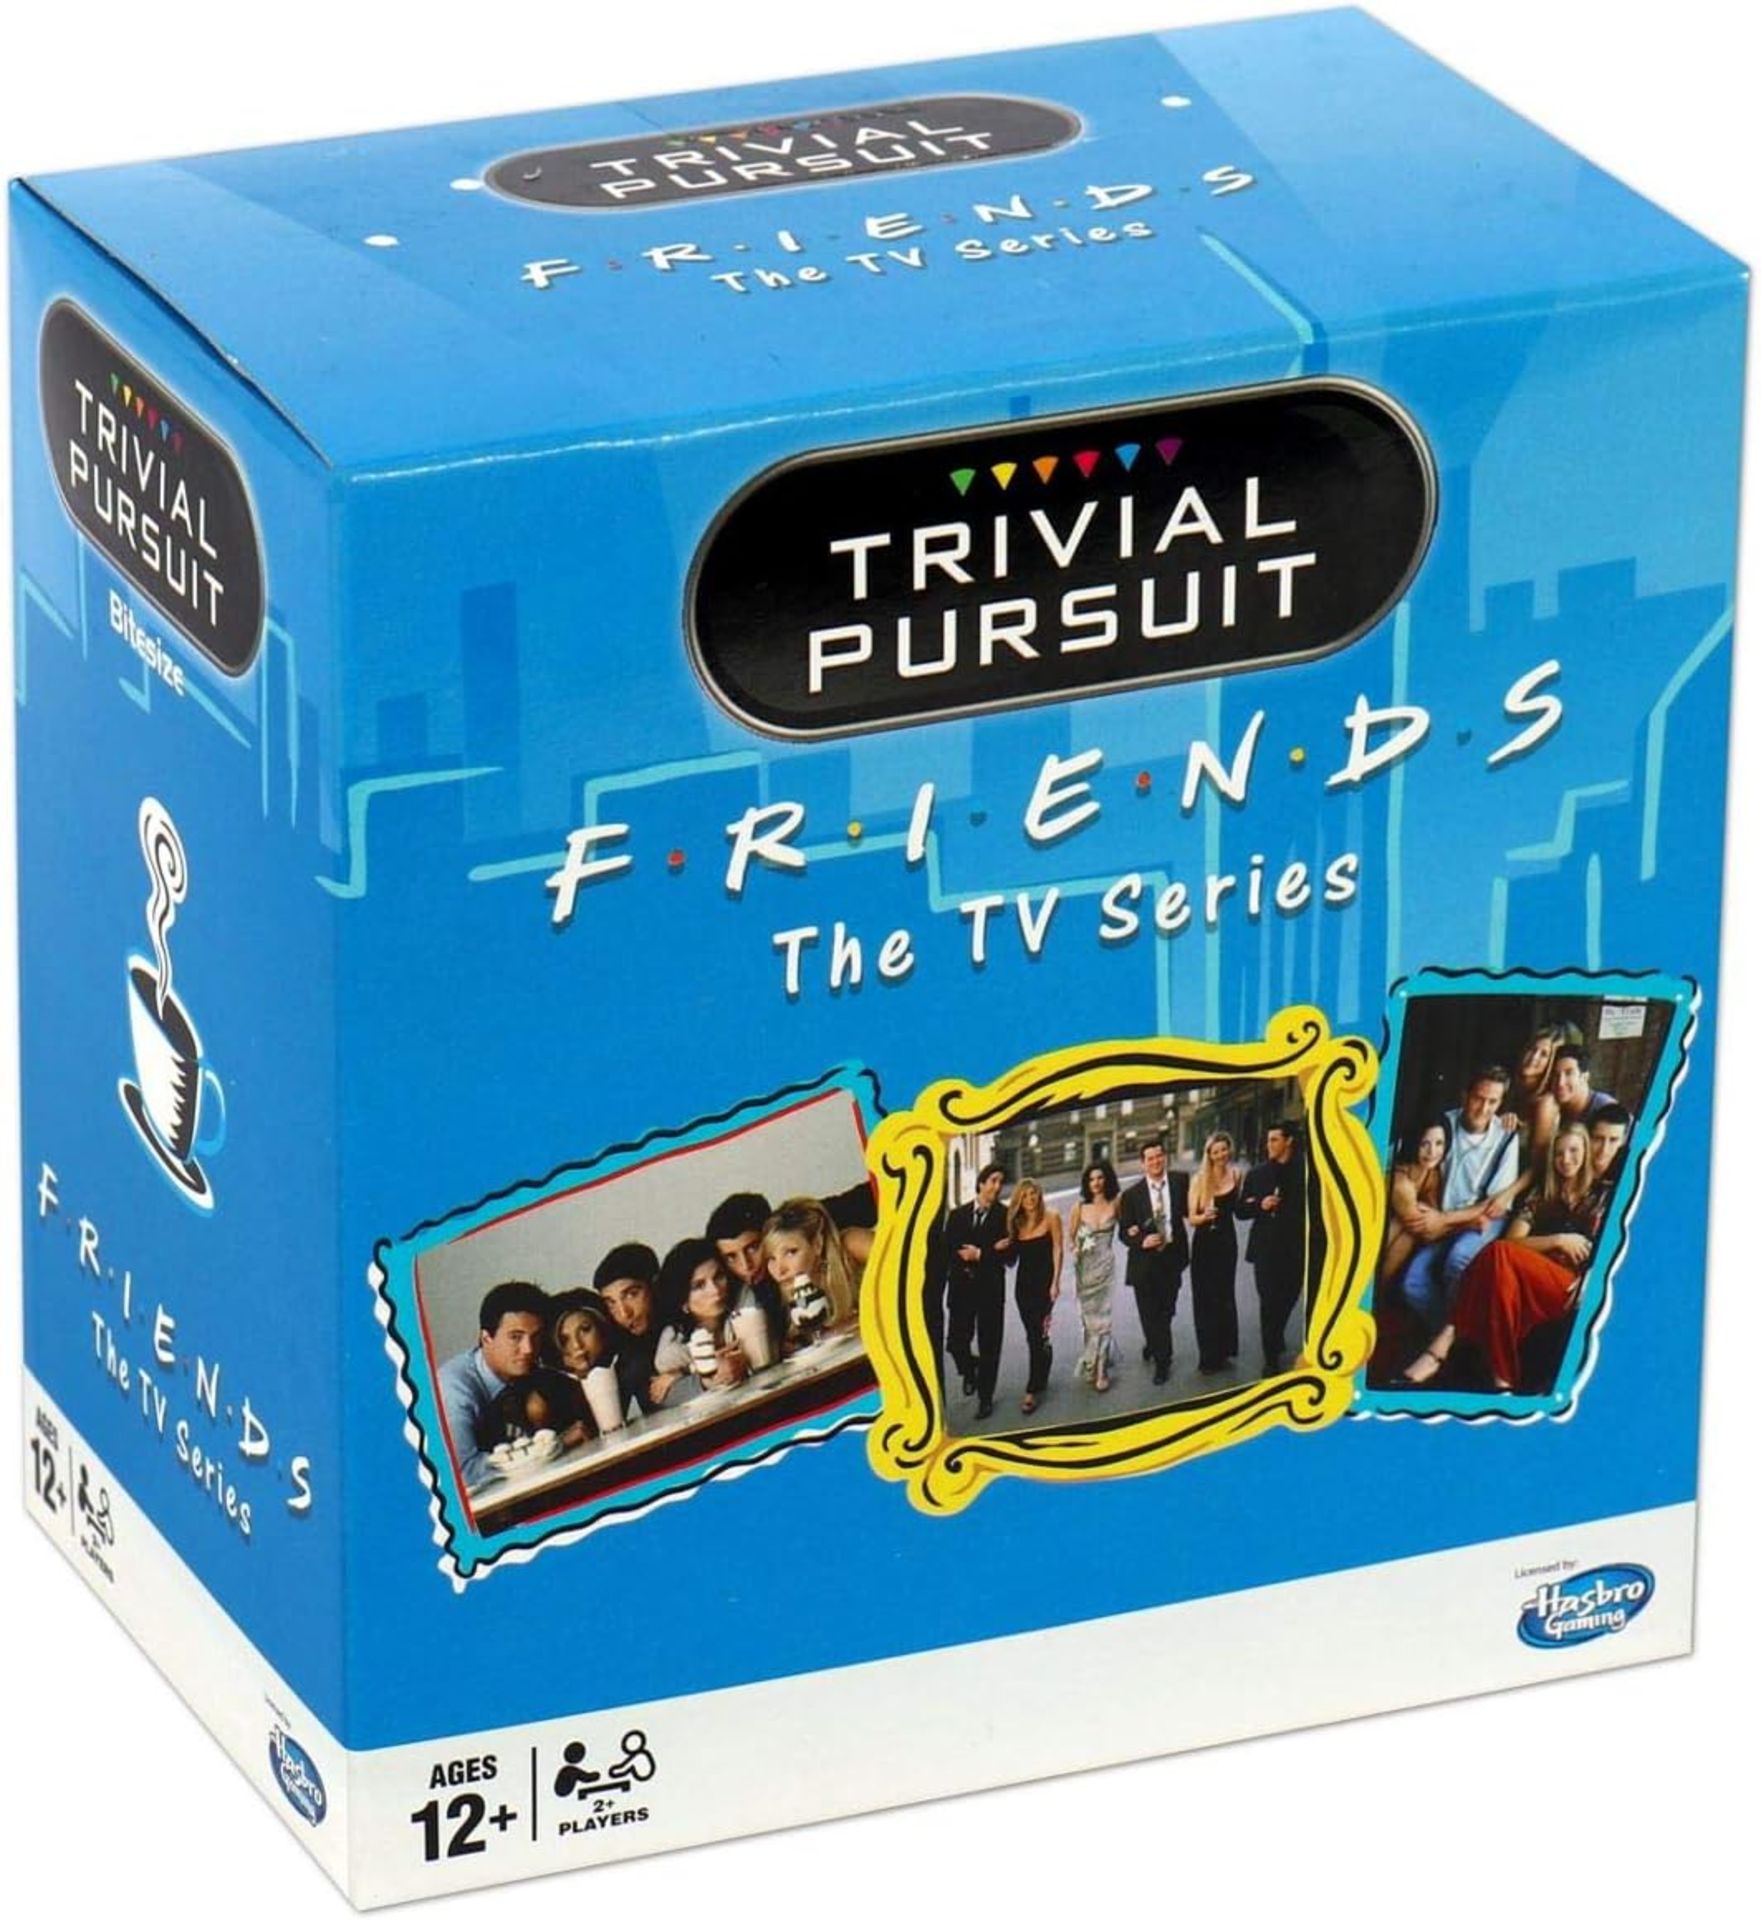 100 X NEW FRIENDS TRIVIAL PURSUIT KNOWLEDGE CARD GAME